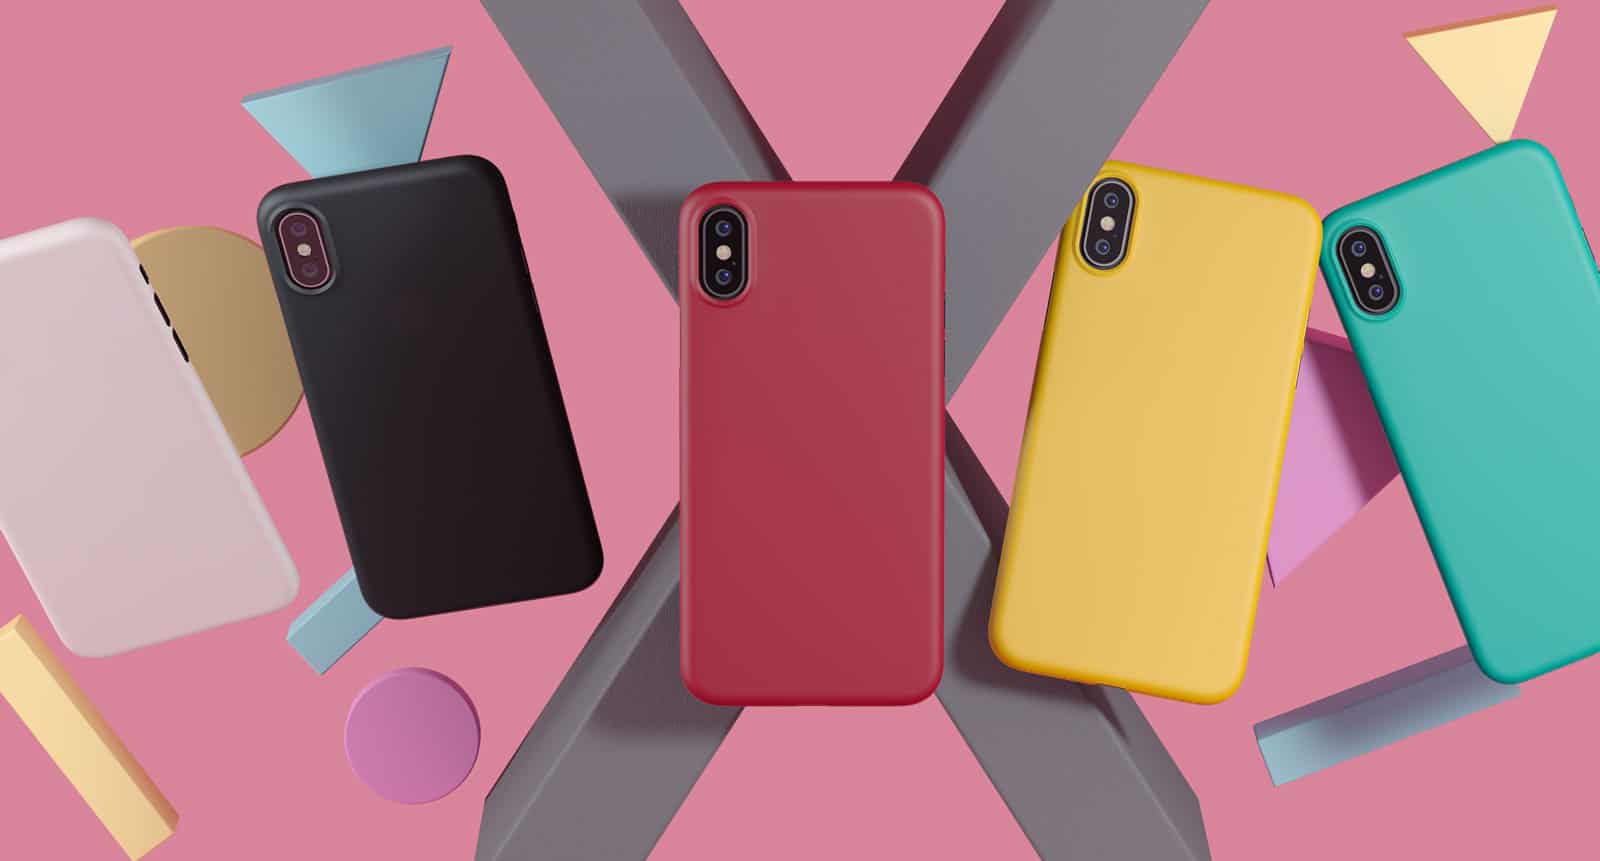 These Kase ultrathin iPhone X cases live up to the sleek simplicity of Apple design philosophy.